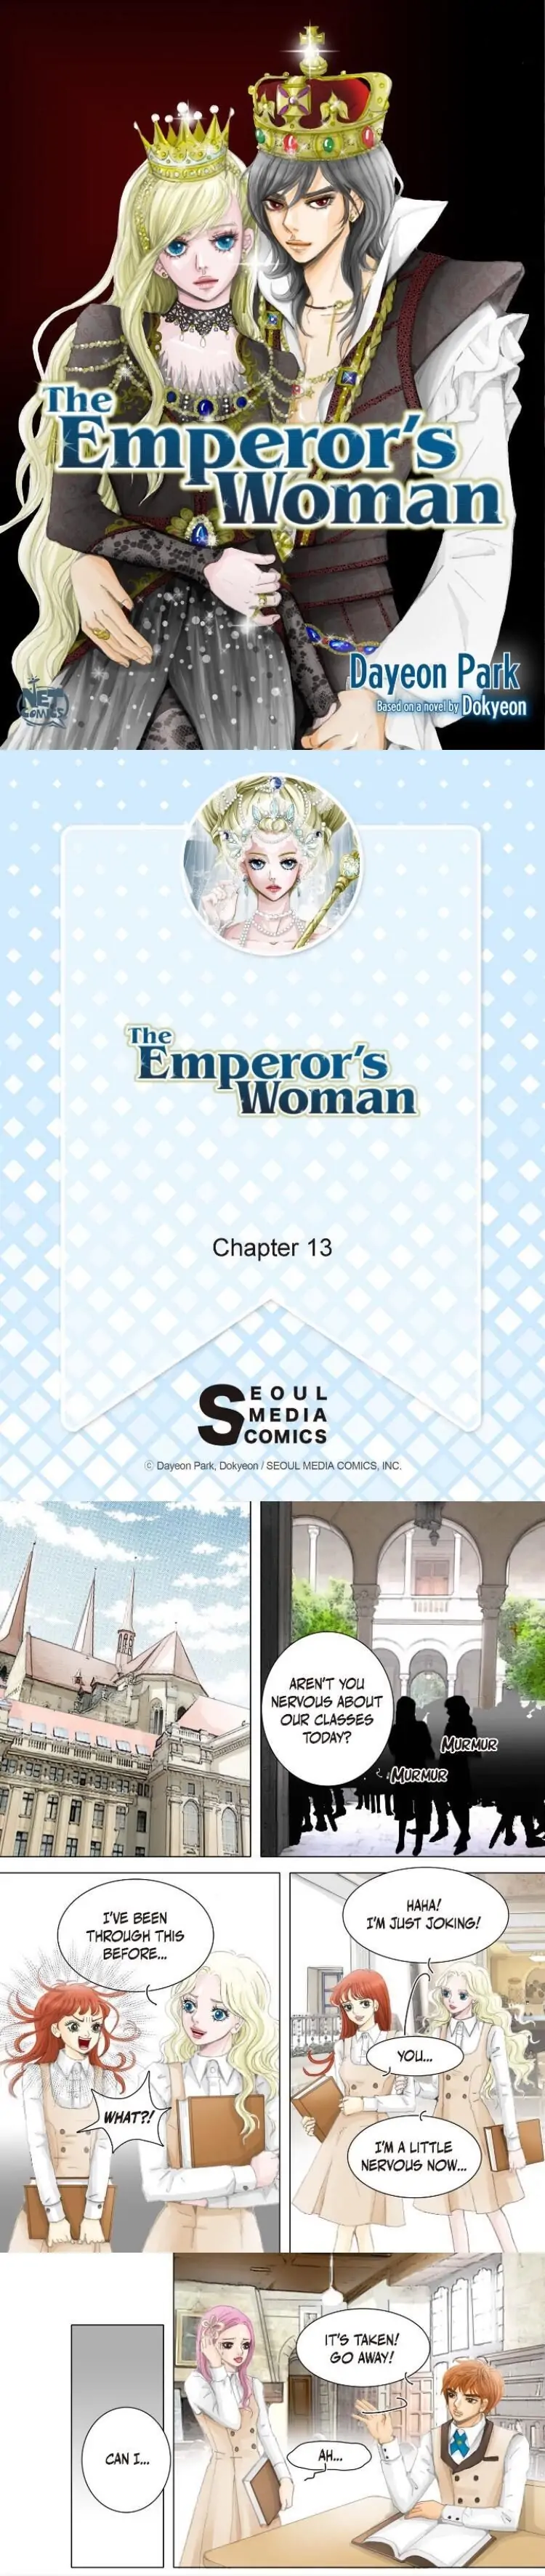 The Emperor’s Woman chapter 13